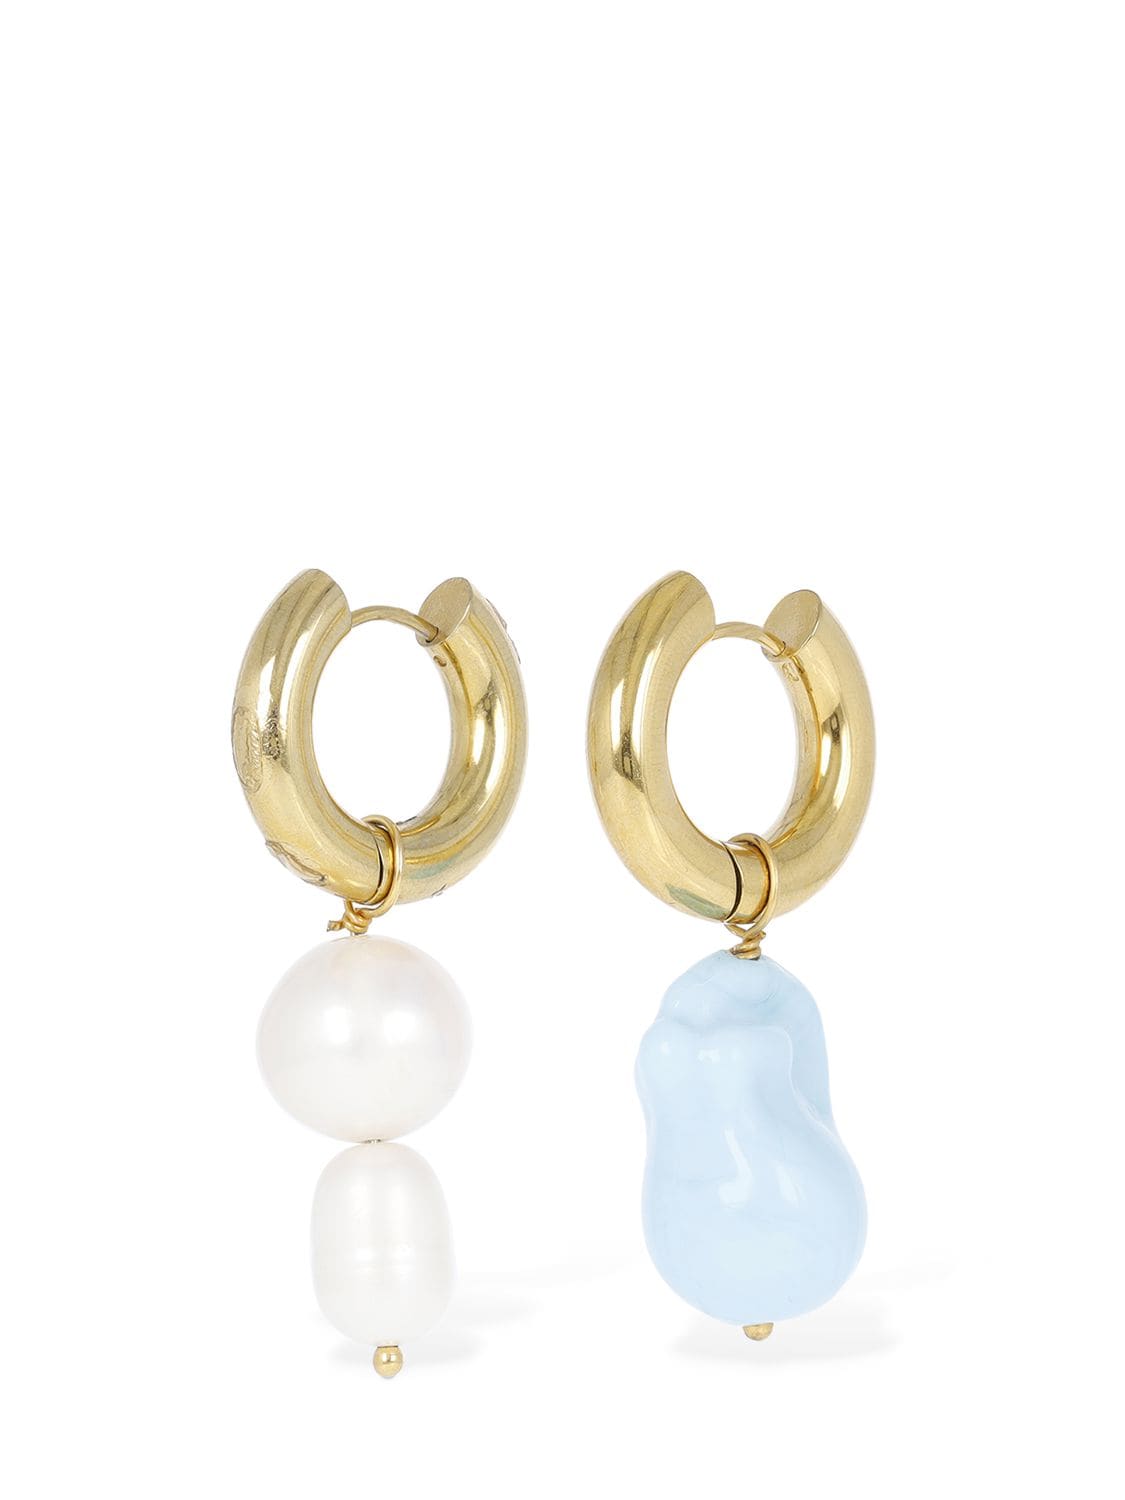 PEARL & TURQUOISE MISMATCHED EARRINGS